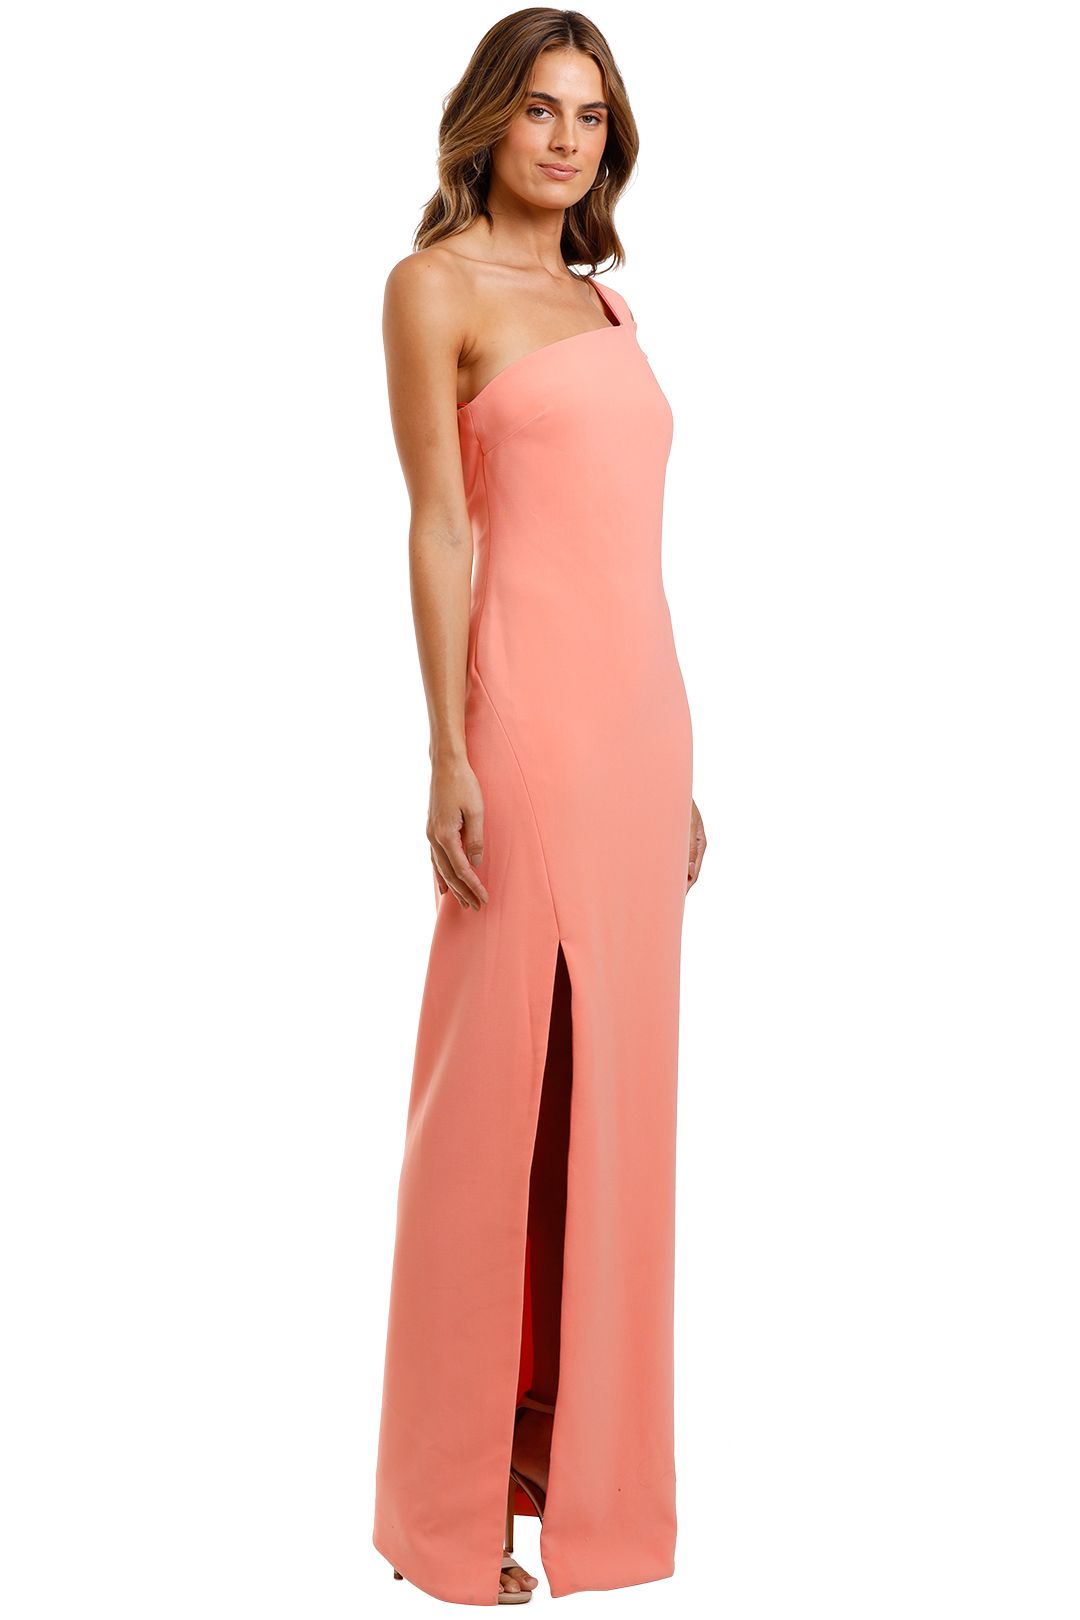 Likely NYC Maxson Gown Apricot Side Split